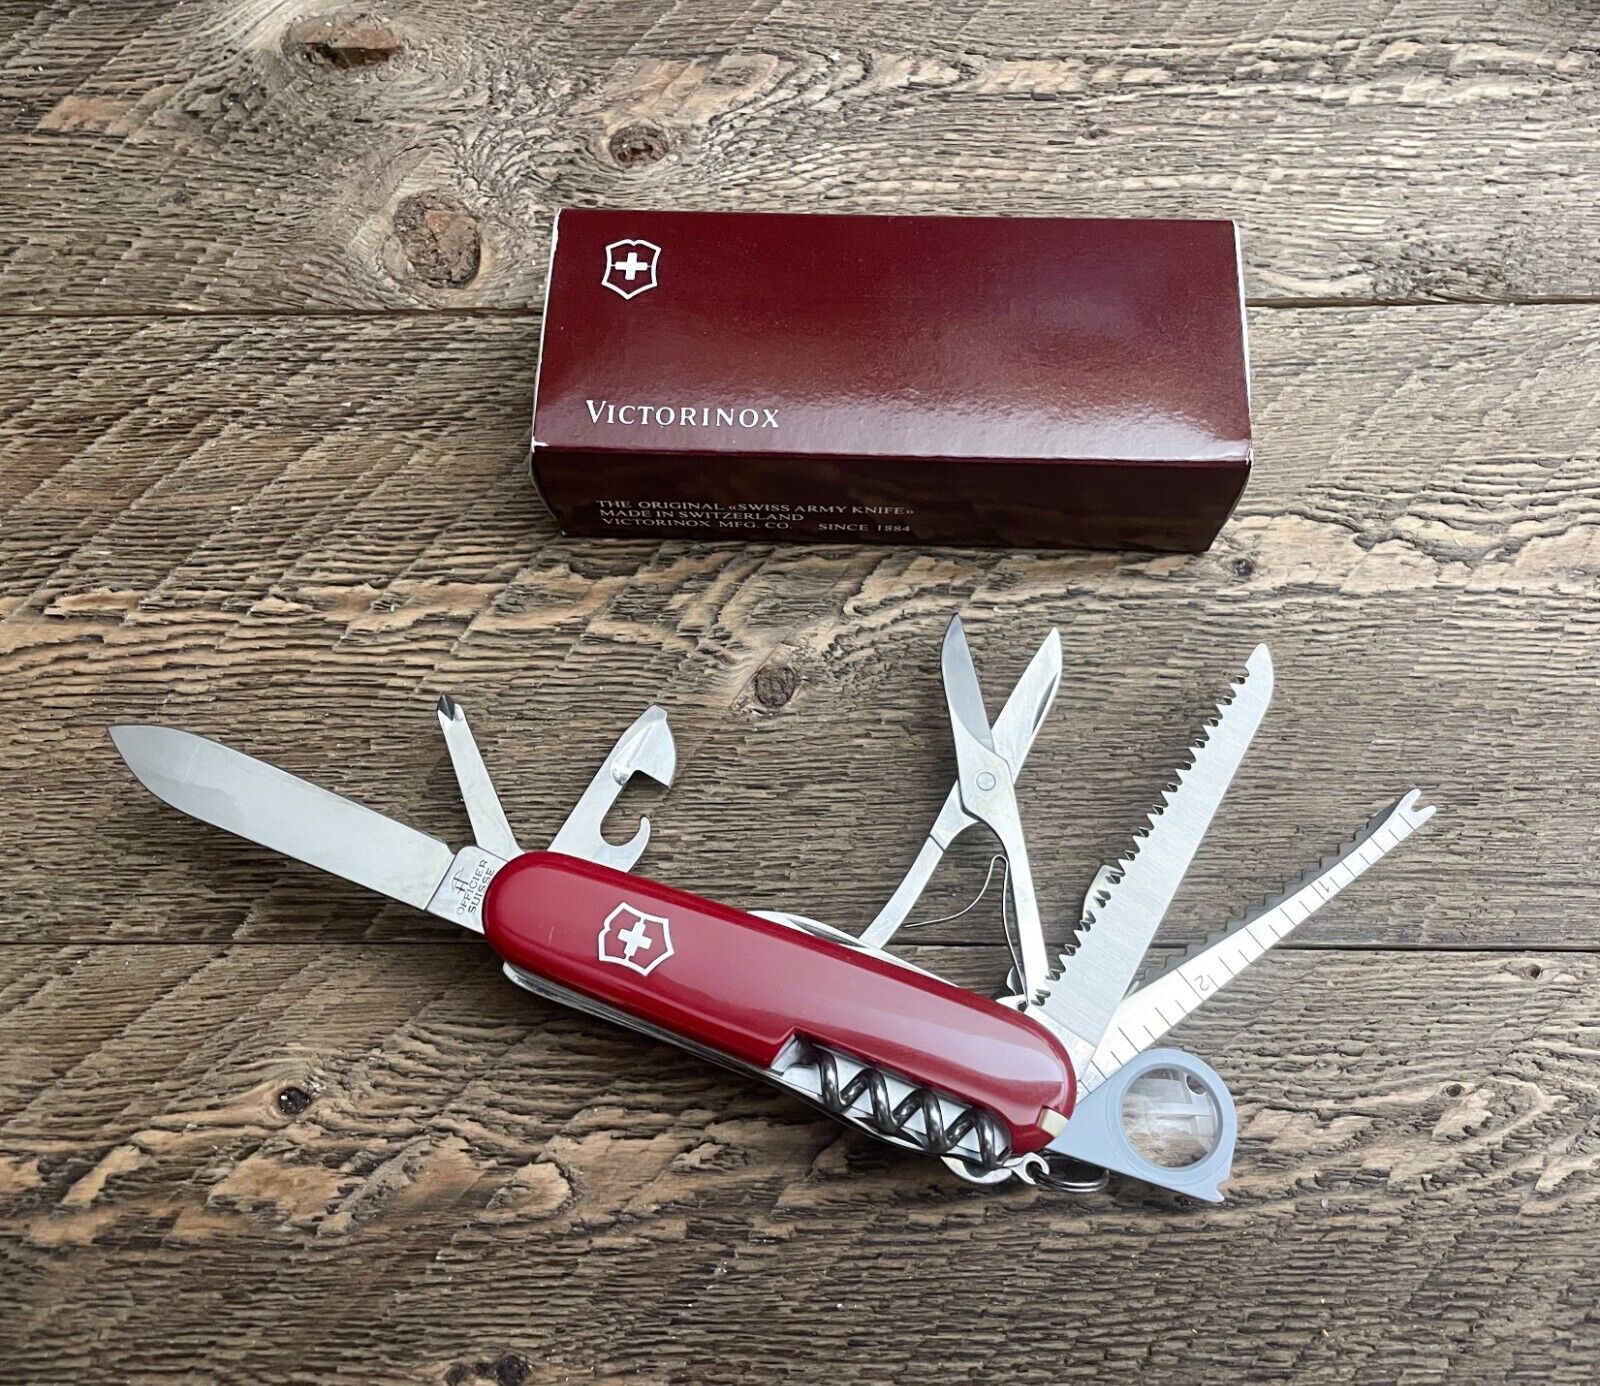 Victorinox Outdoorsman Marlboro Red Swiss Army Multi-Tool. Price is for 1 Knife